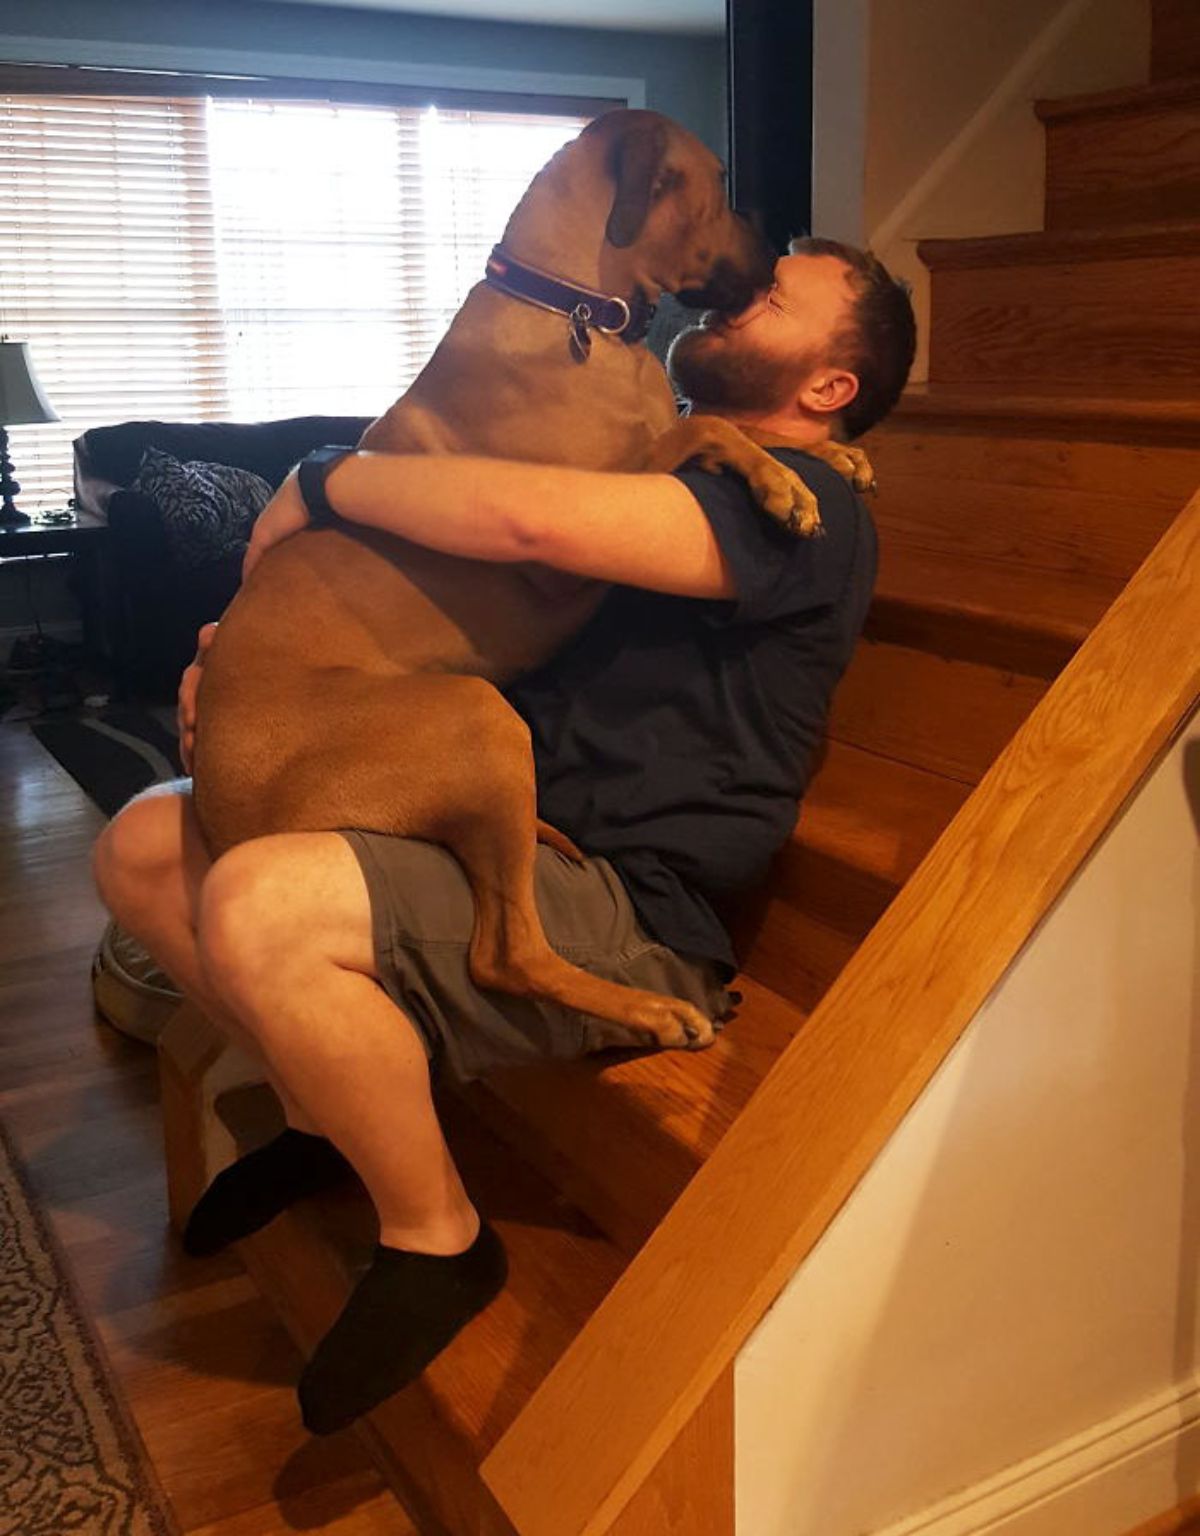 large brown dog sitting on a man's lap and being hugged while the dog is licking his face